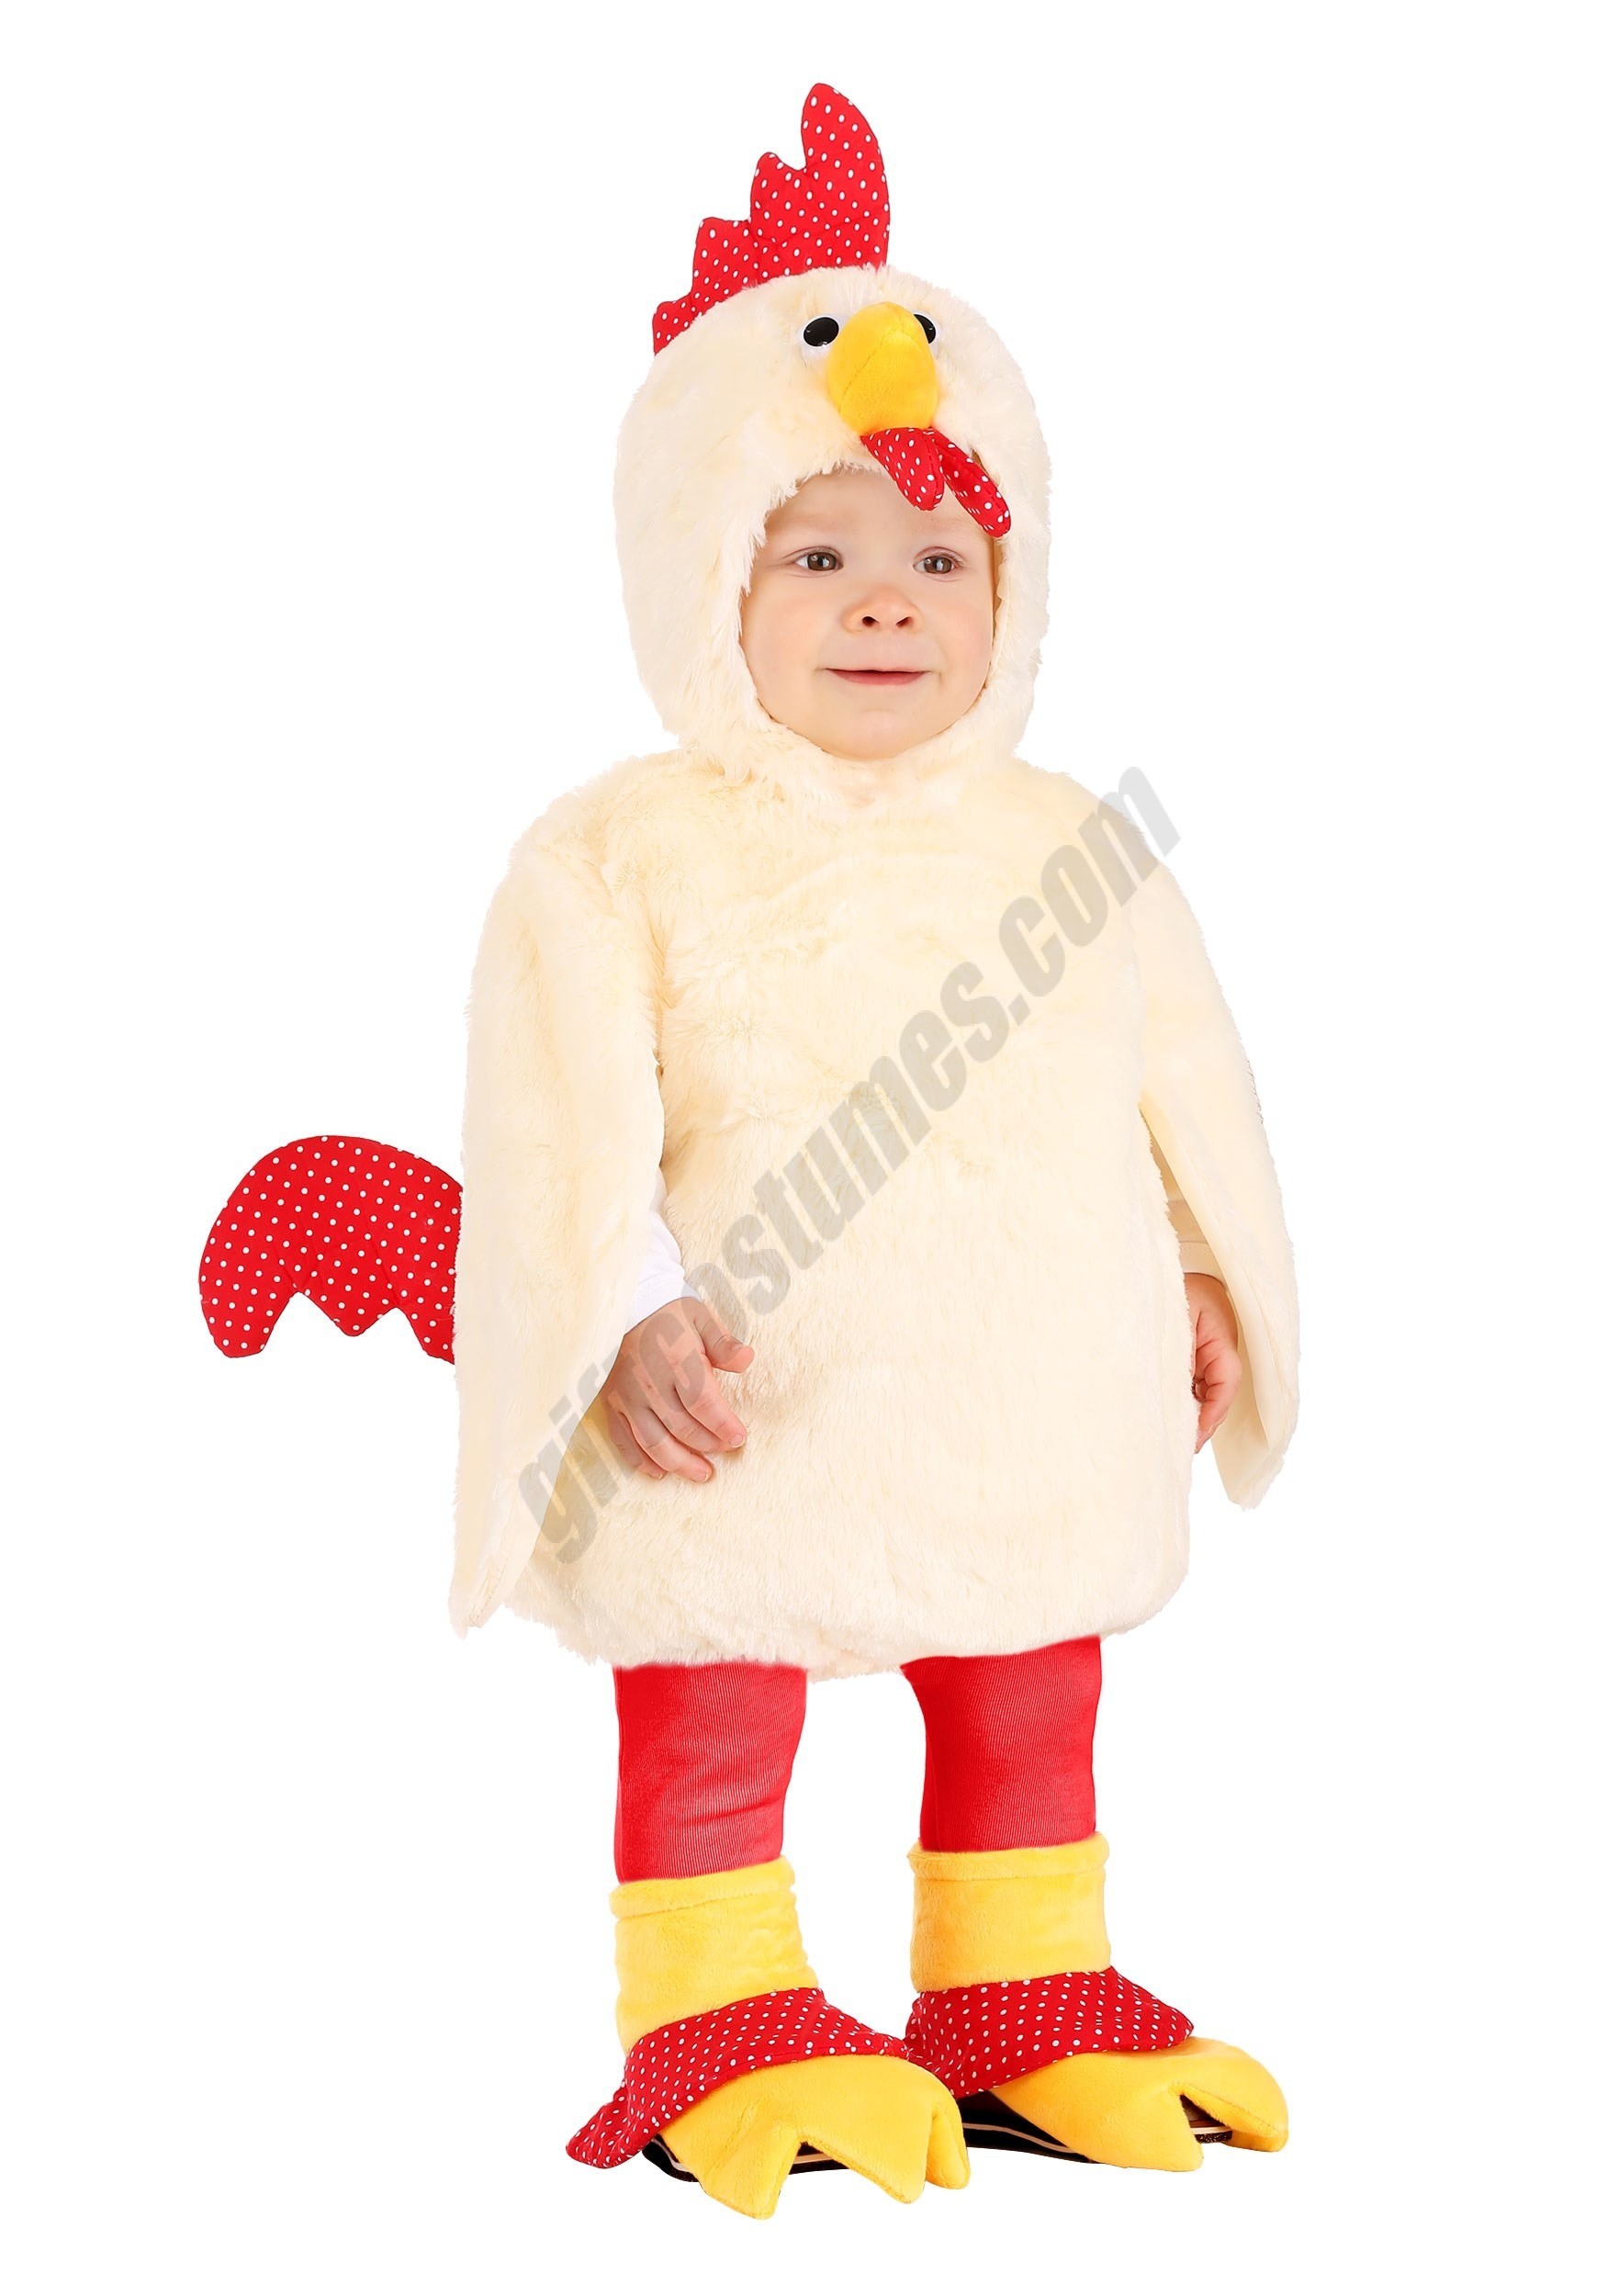 Reese the Rooster Costume for Toddlers Promotions - Reese the Rooster Costume for Toddlers Promotions